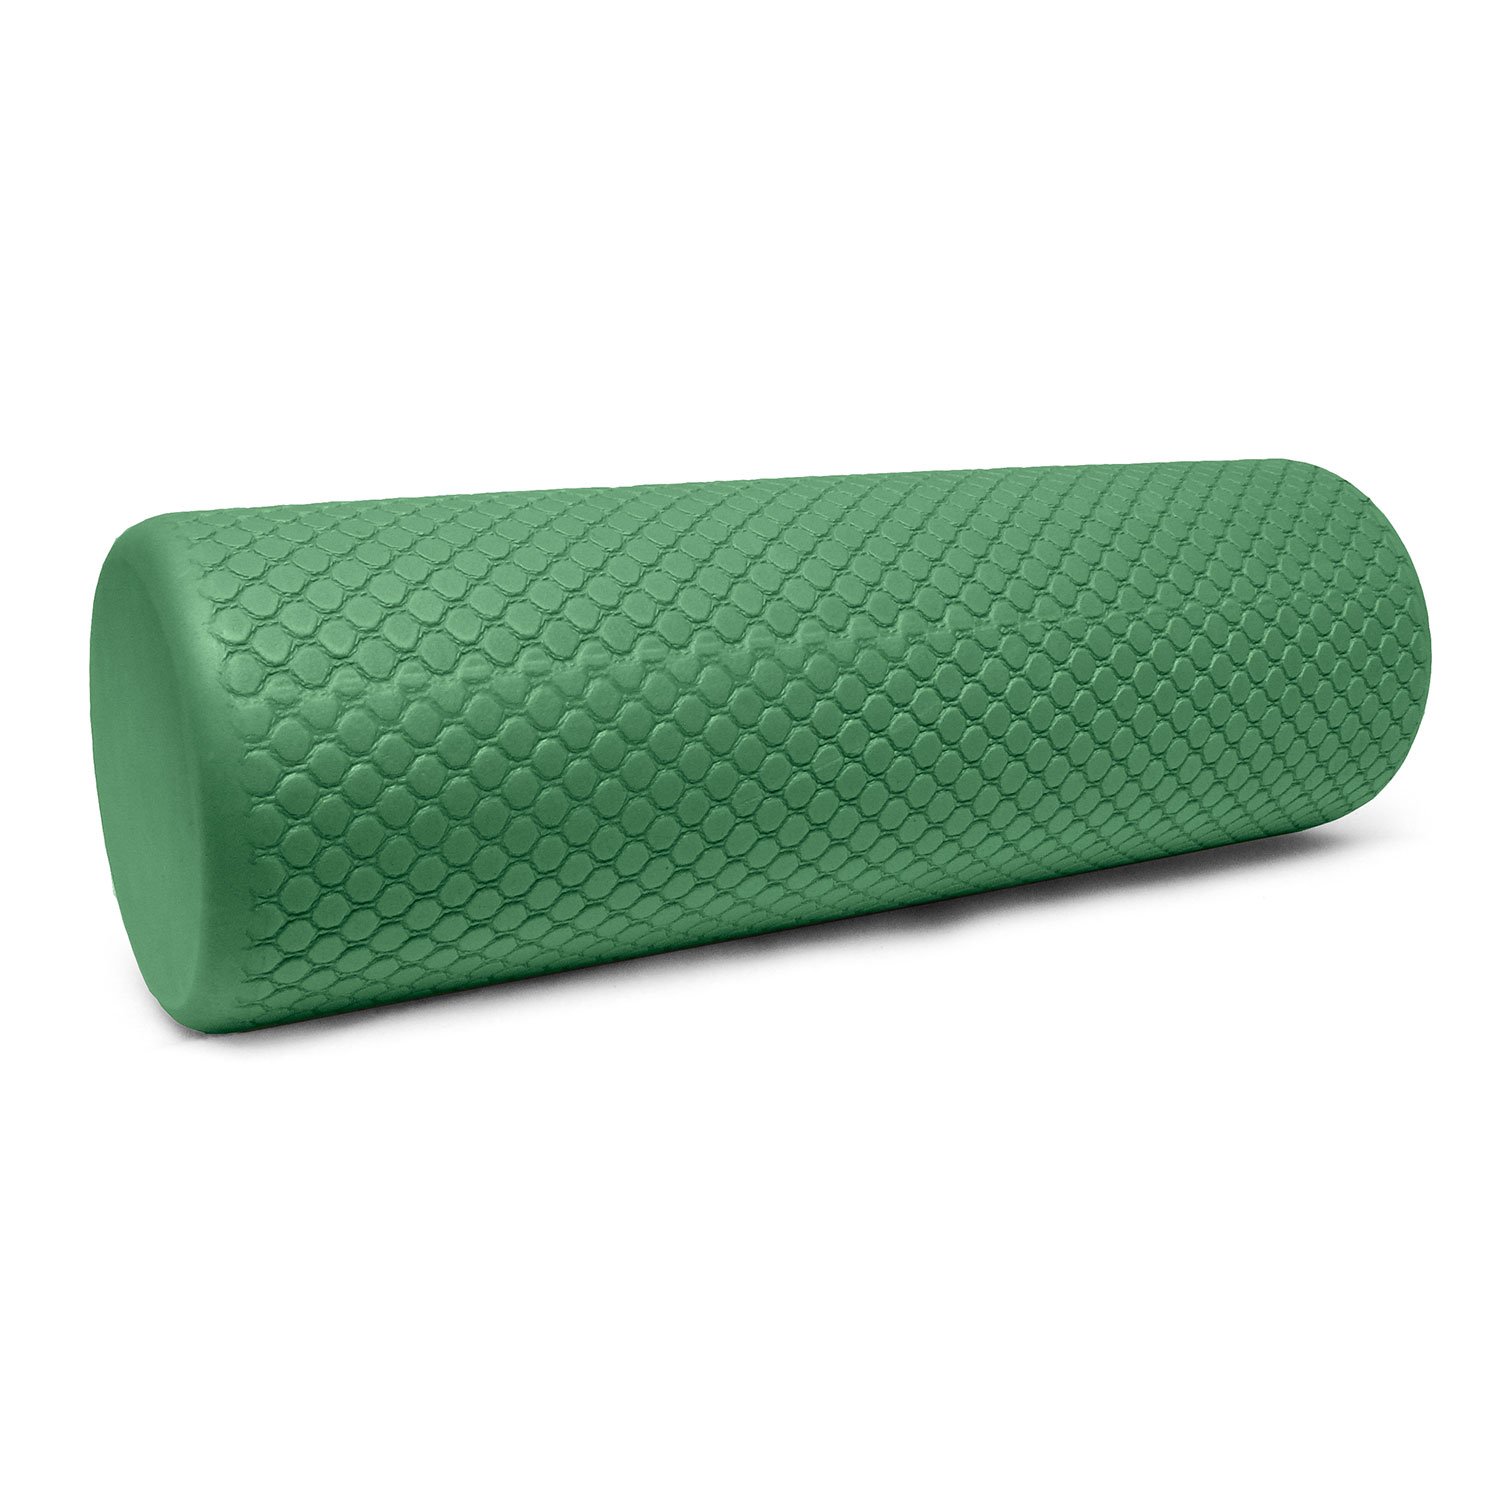 12" Gaiam Restore Compact Foam Roller $0.86 + Free Shipping w/ Prime or orders $35+